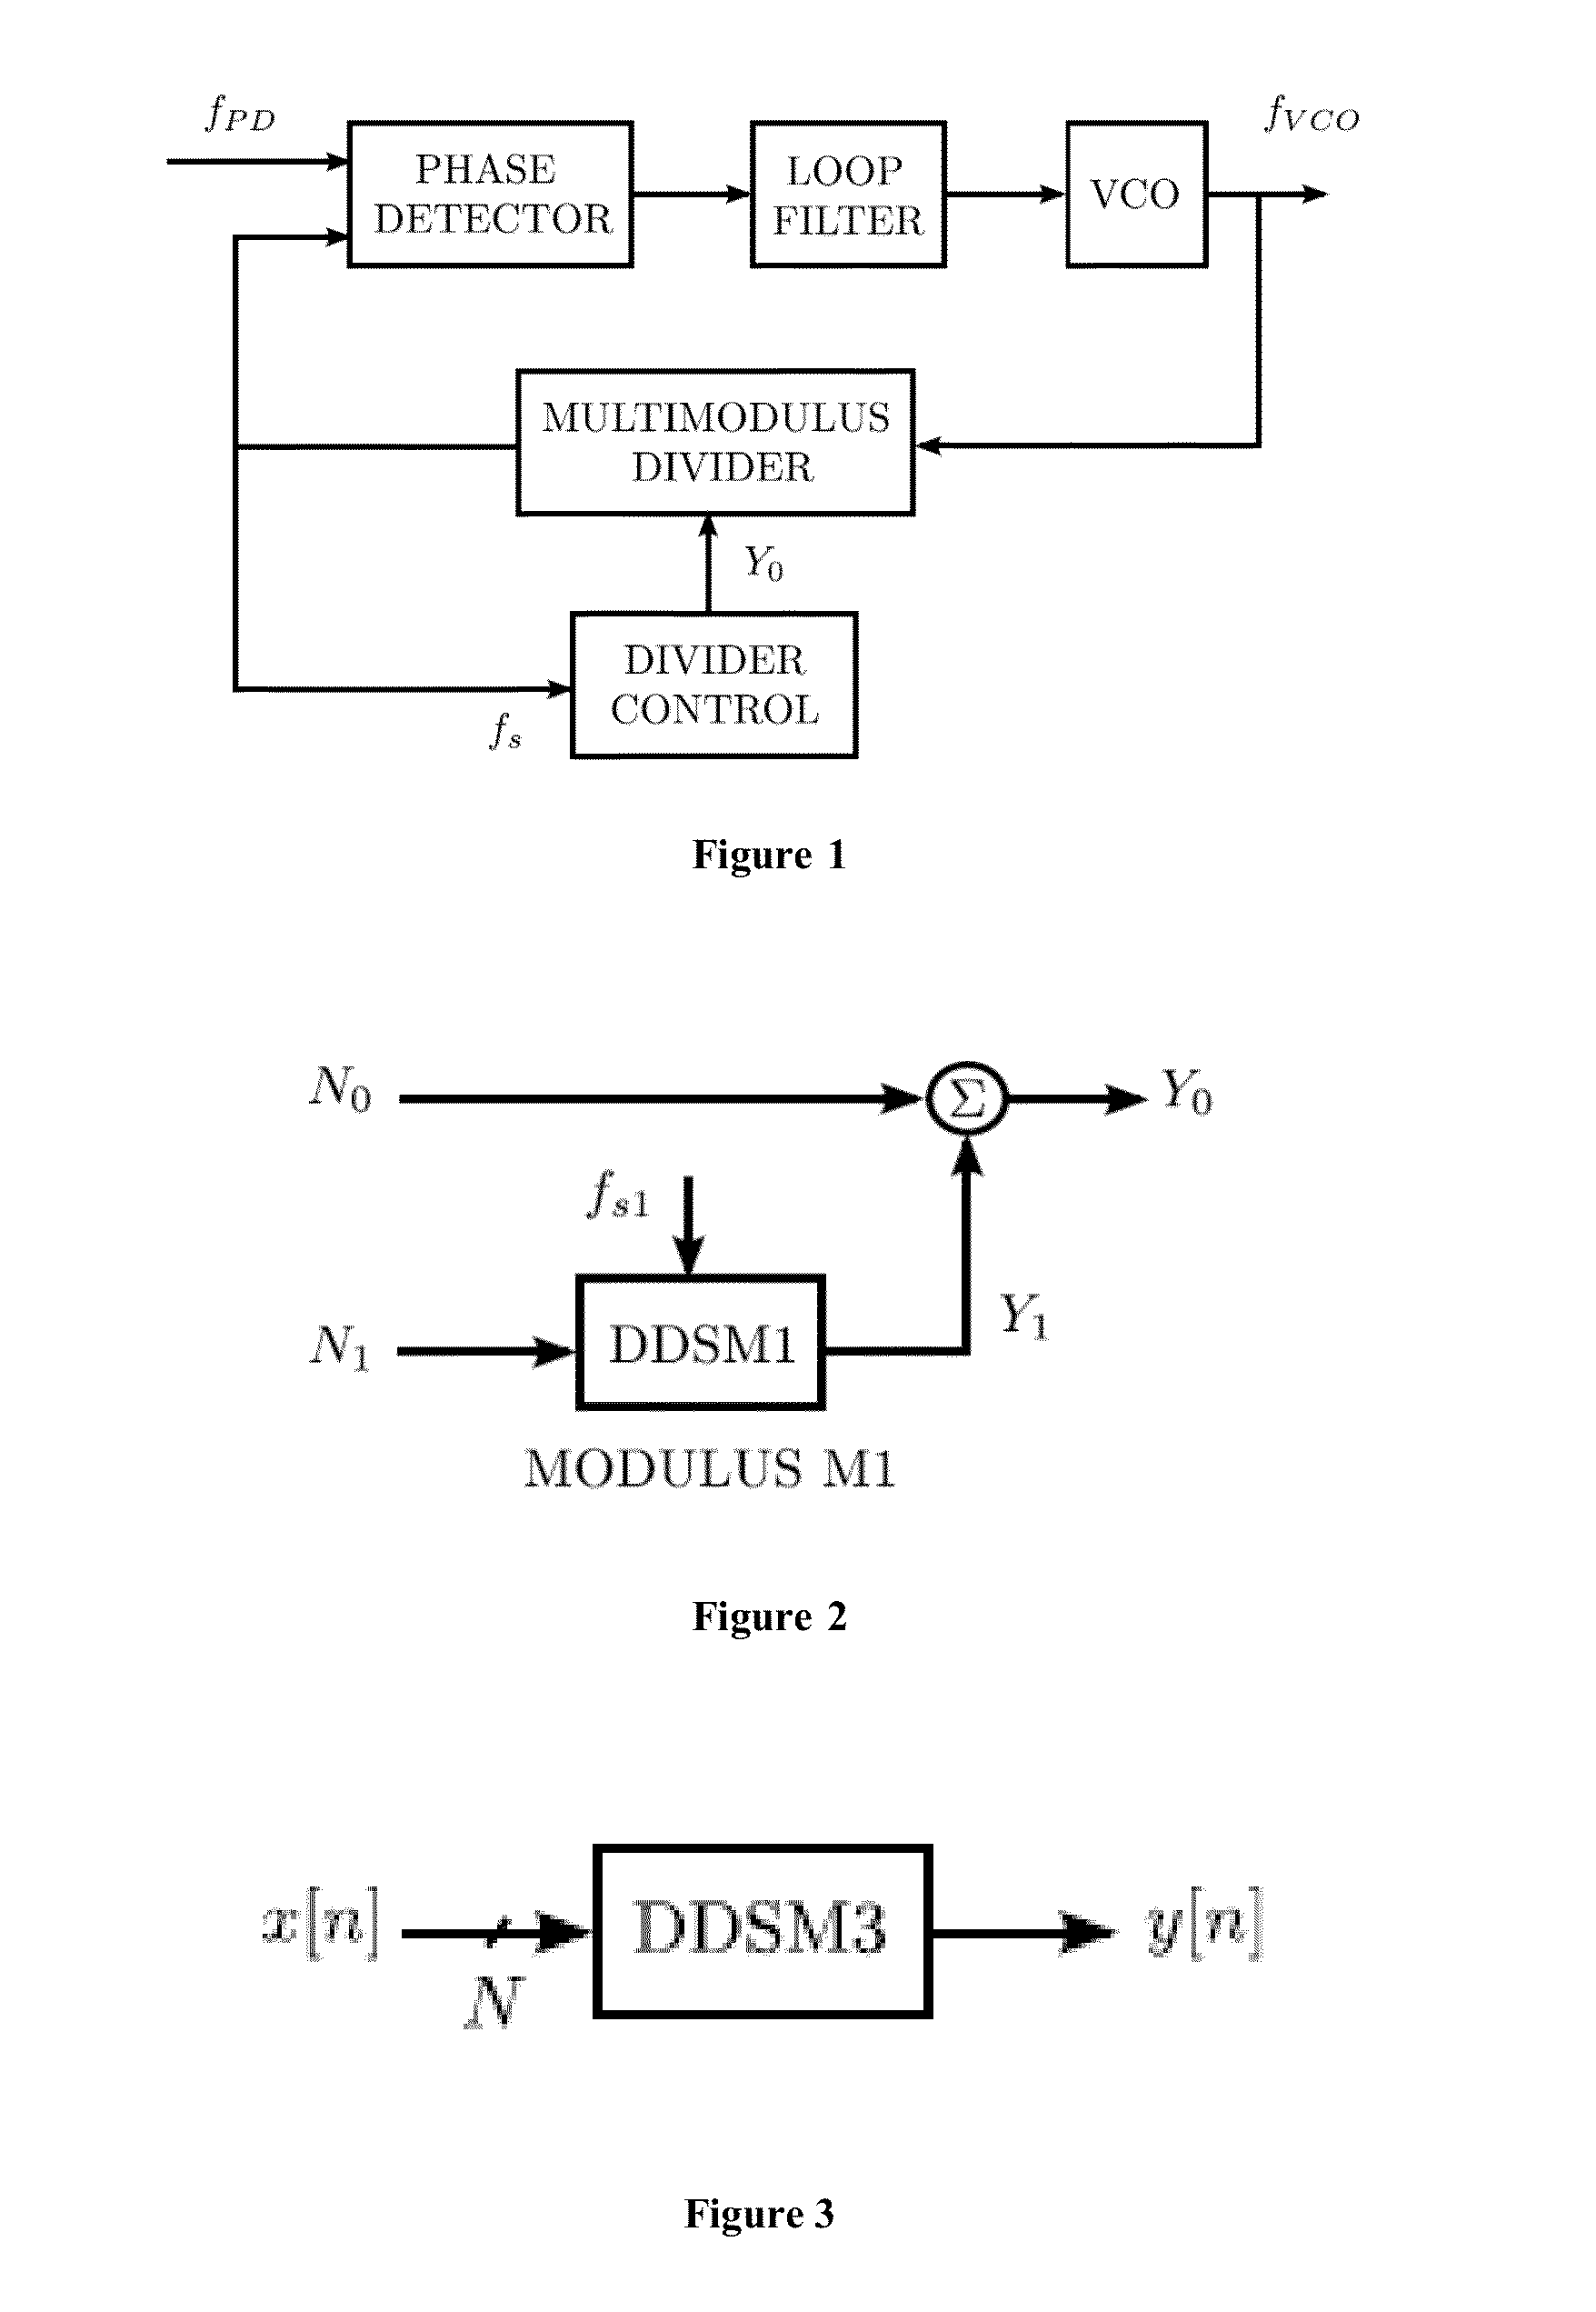 Pipelined Bus-Splitting Digital Delta-Sigma Modulator for Fractional-N Frequency Synthesizer System and Method